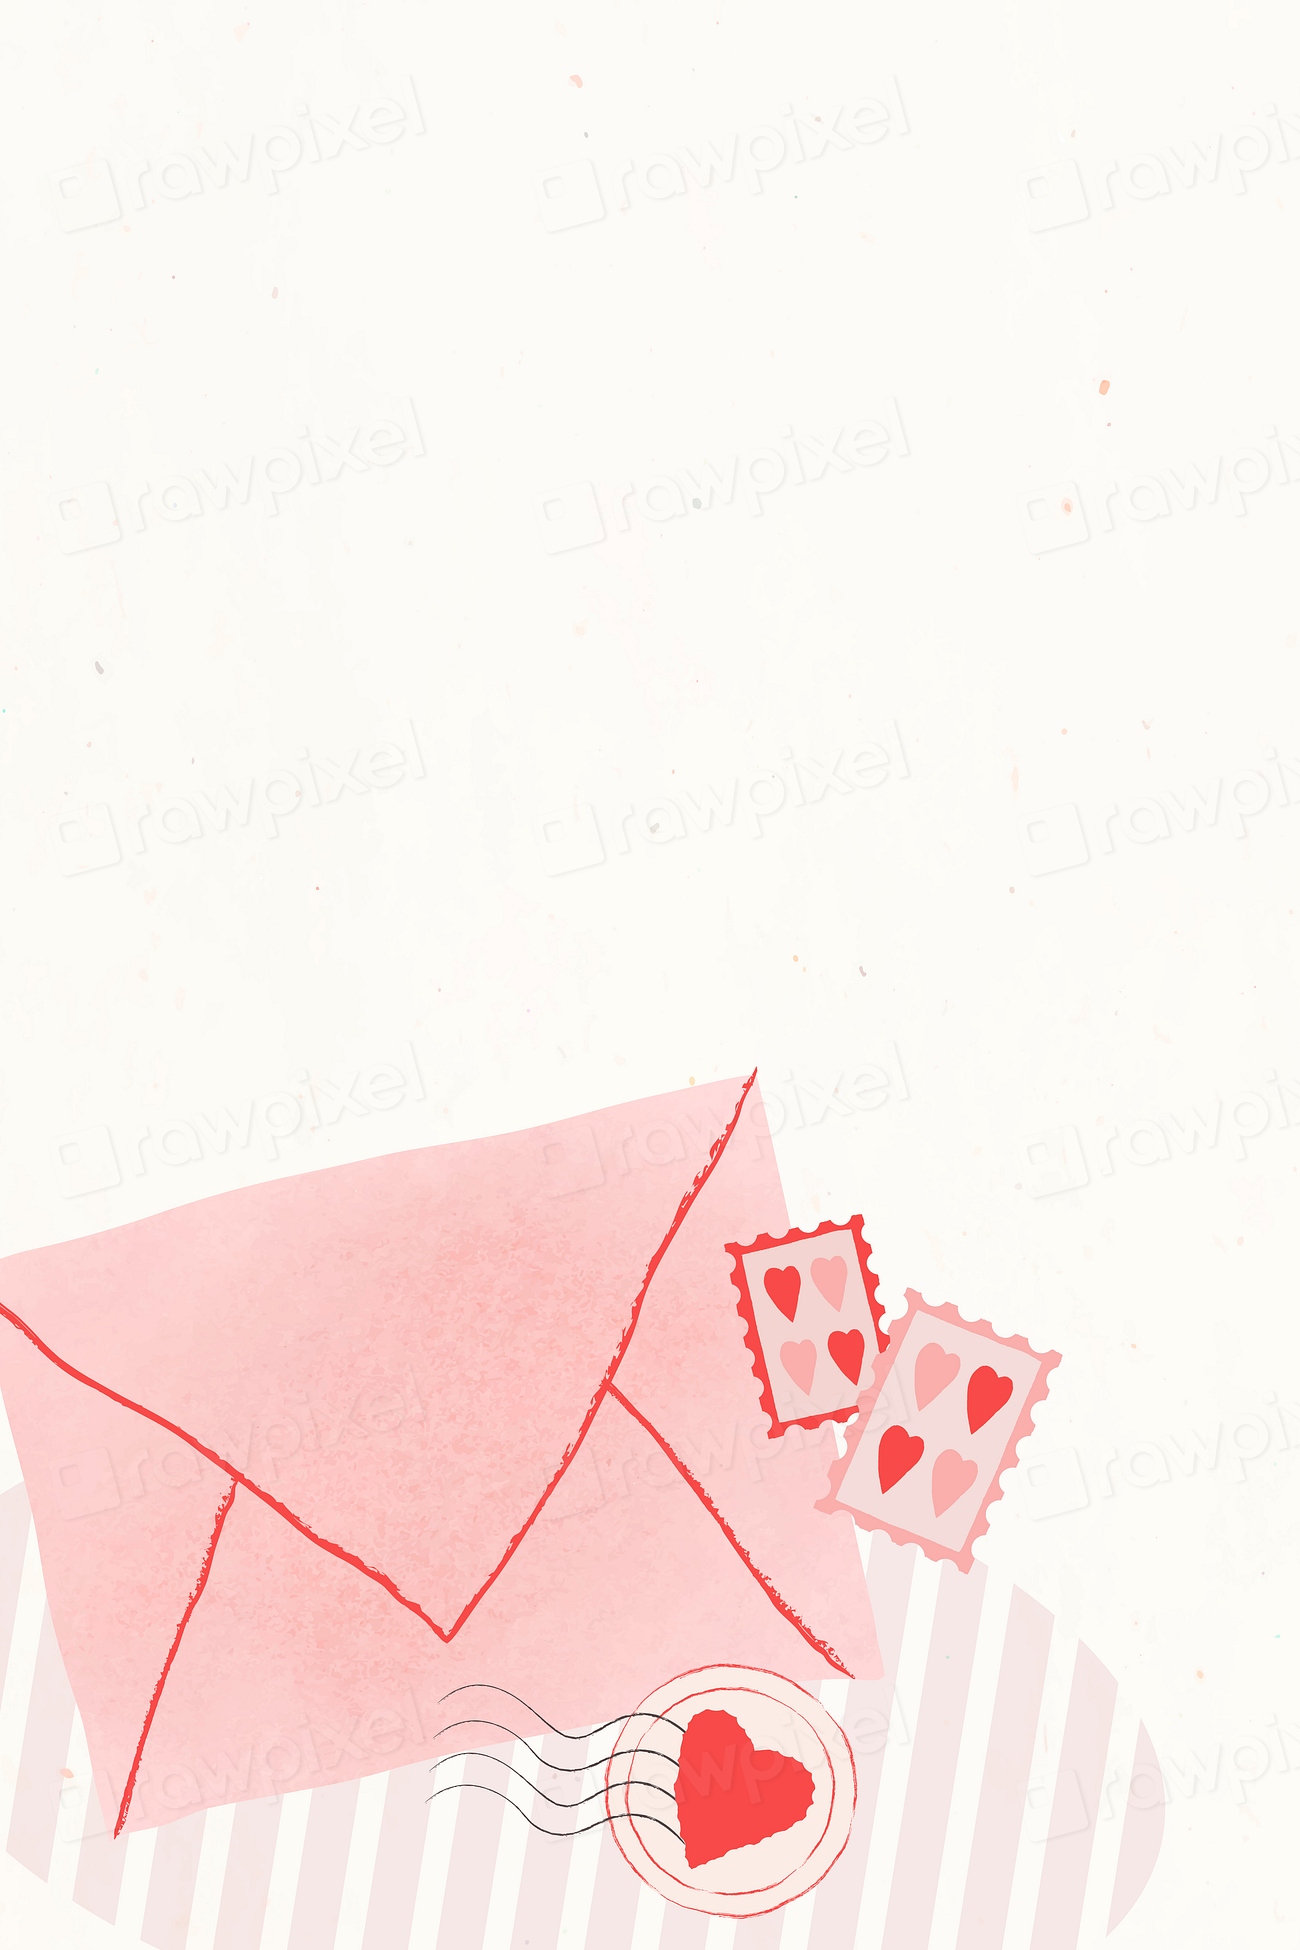 Love letter vector background for Valentine’s | Free Vector - rawpixel